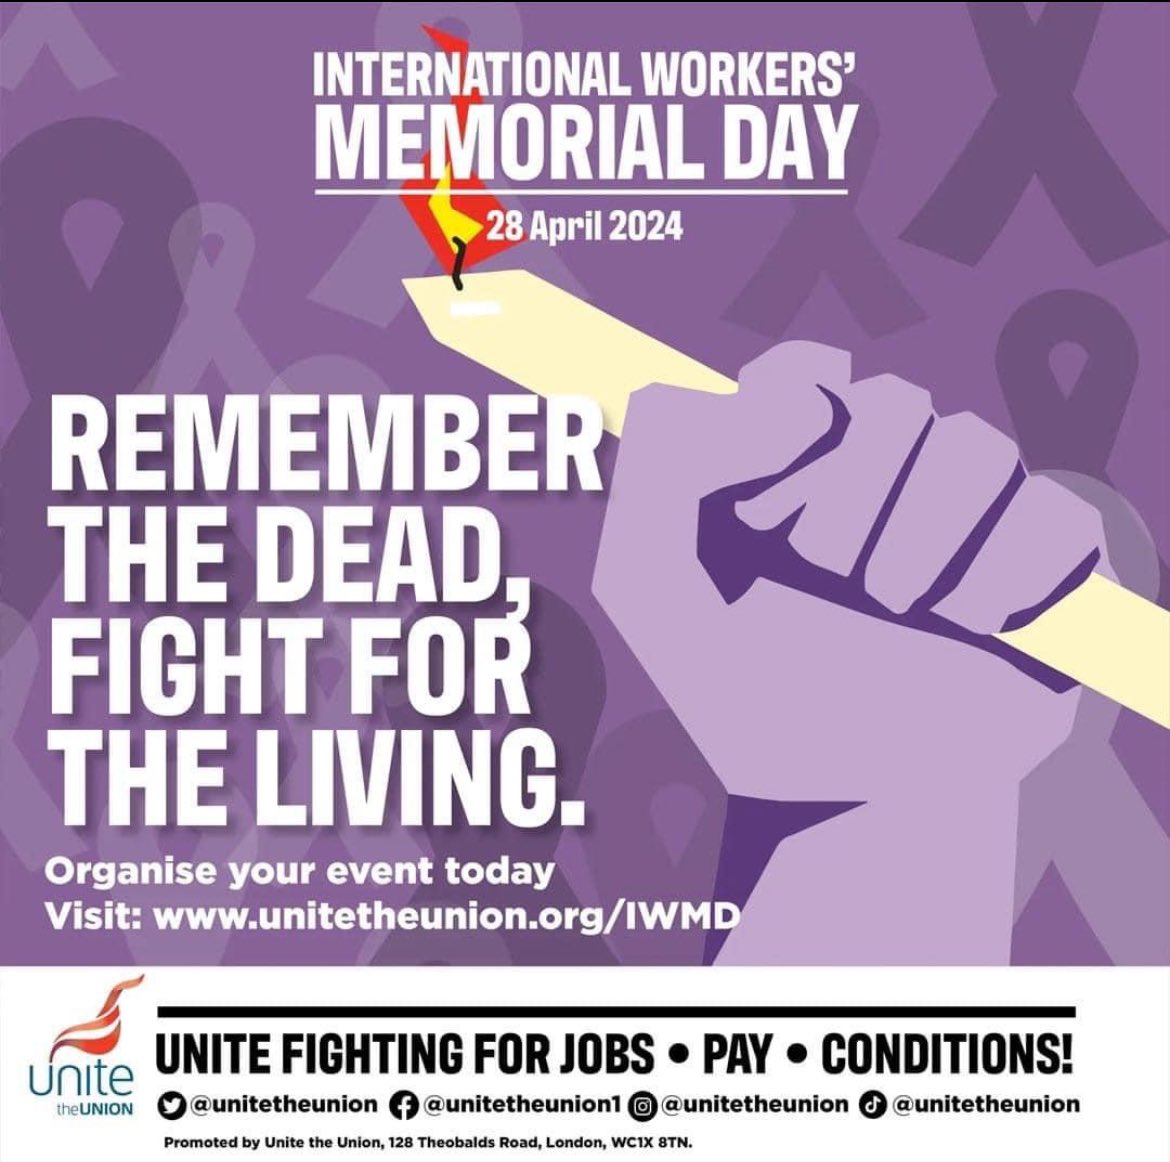 On #WorkersMemorialDay we call for #healthandsafety to become a fundamental #WorkersRight for #Working people #StrongEnforcement saves lives. Remember the Dead & Fight for the Living 💜#IWMD2024 @UniteGibraltar @LlanitoPal @GBCNewsroom @GibChronicle @YourGibraltarTV